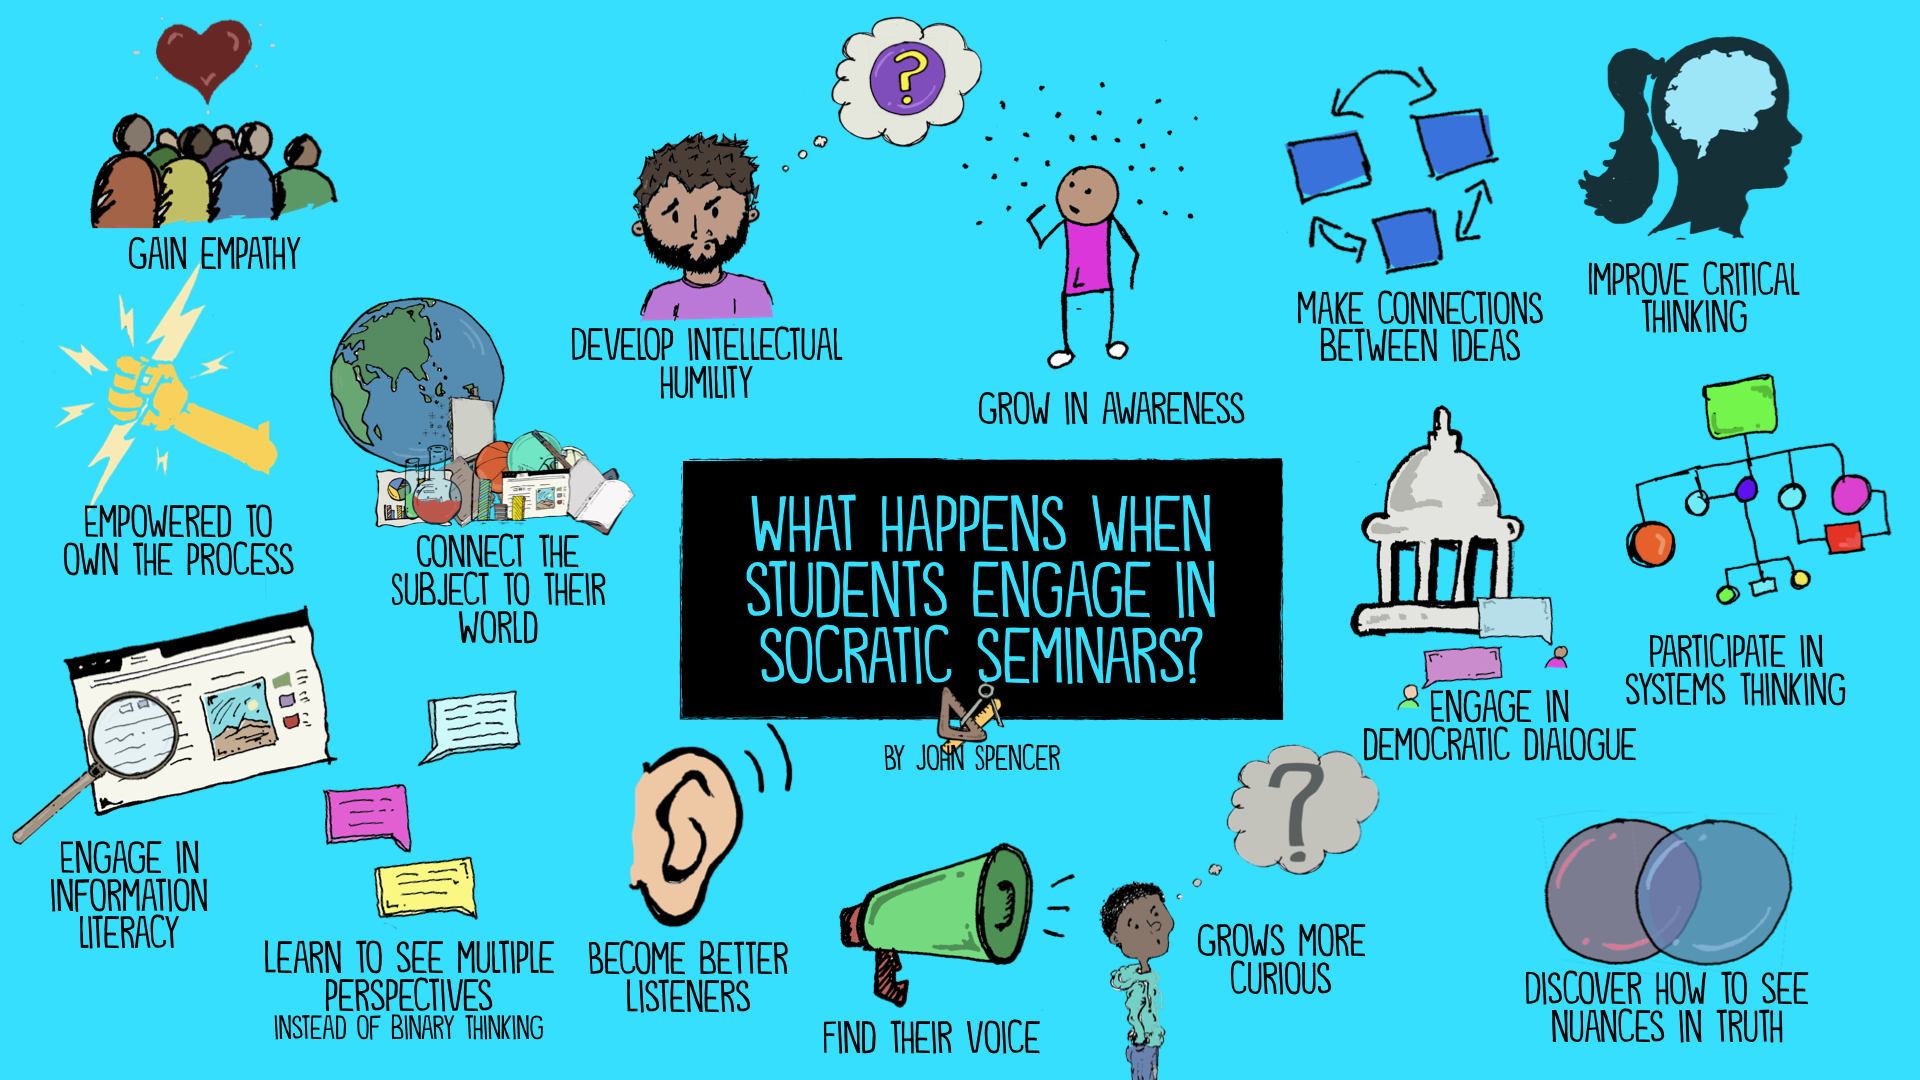 Designing Socratic Seminars to Ensure That All Students Can Participate